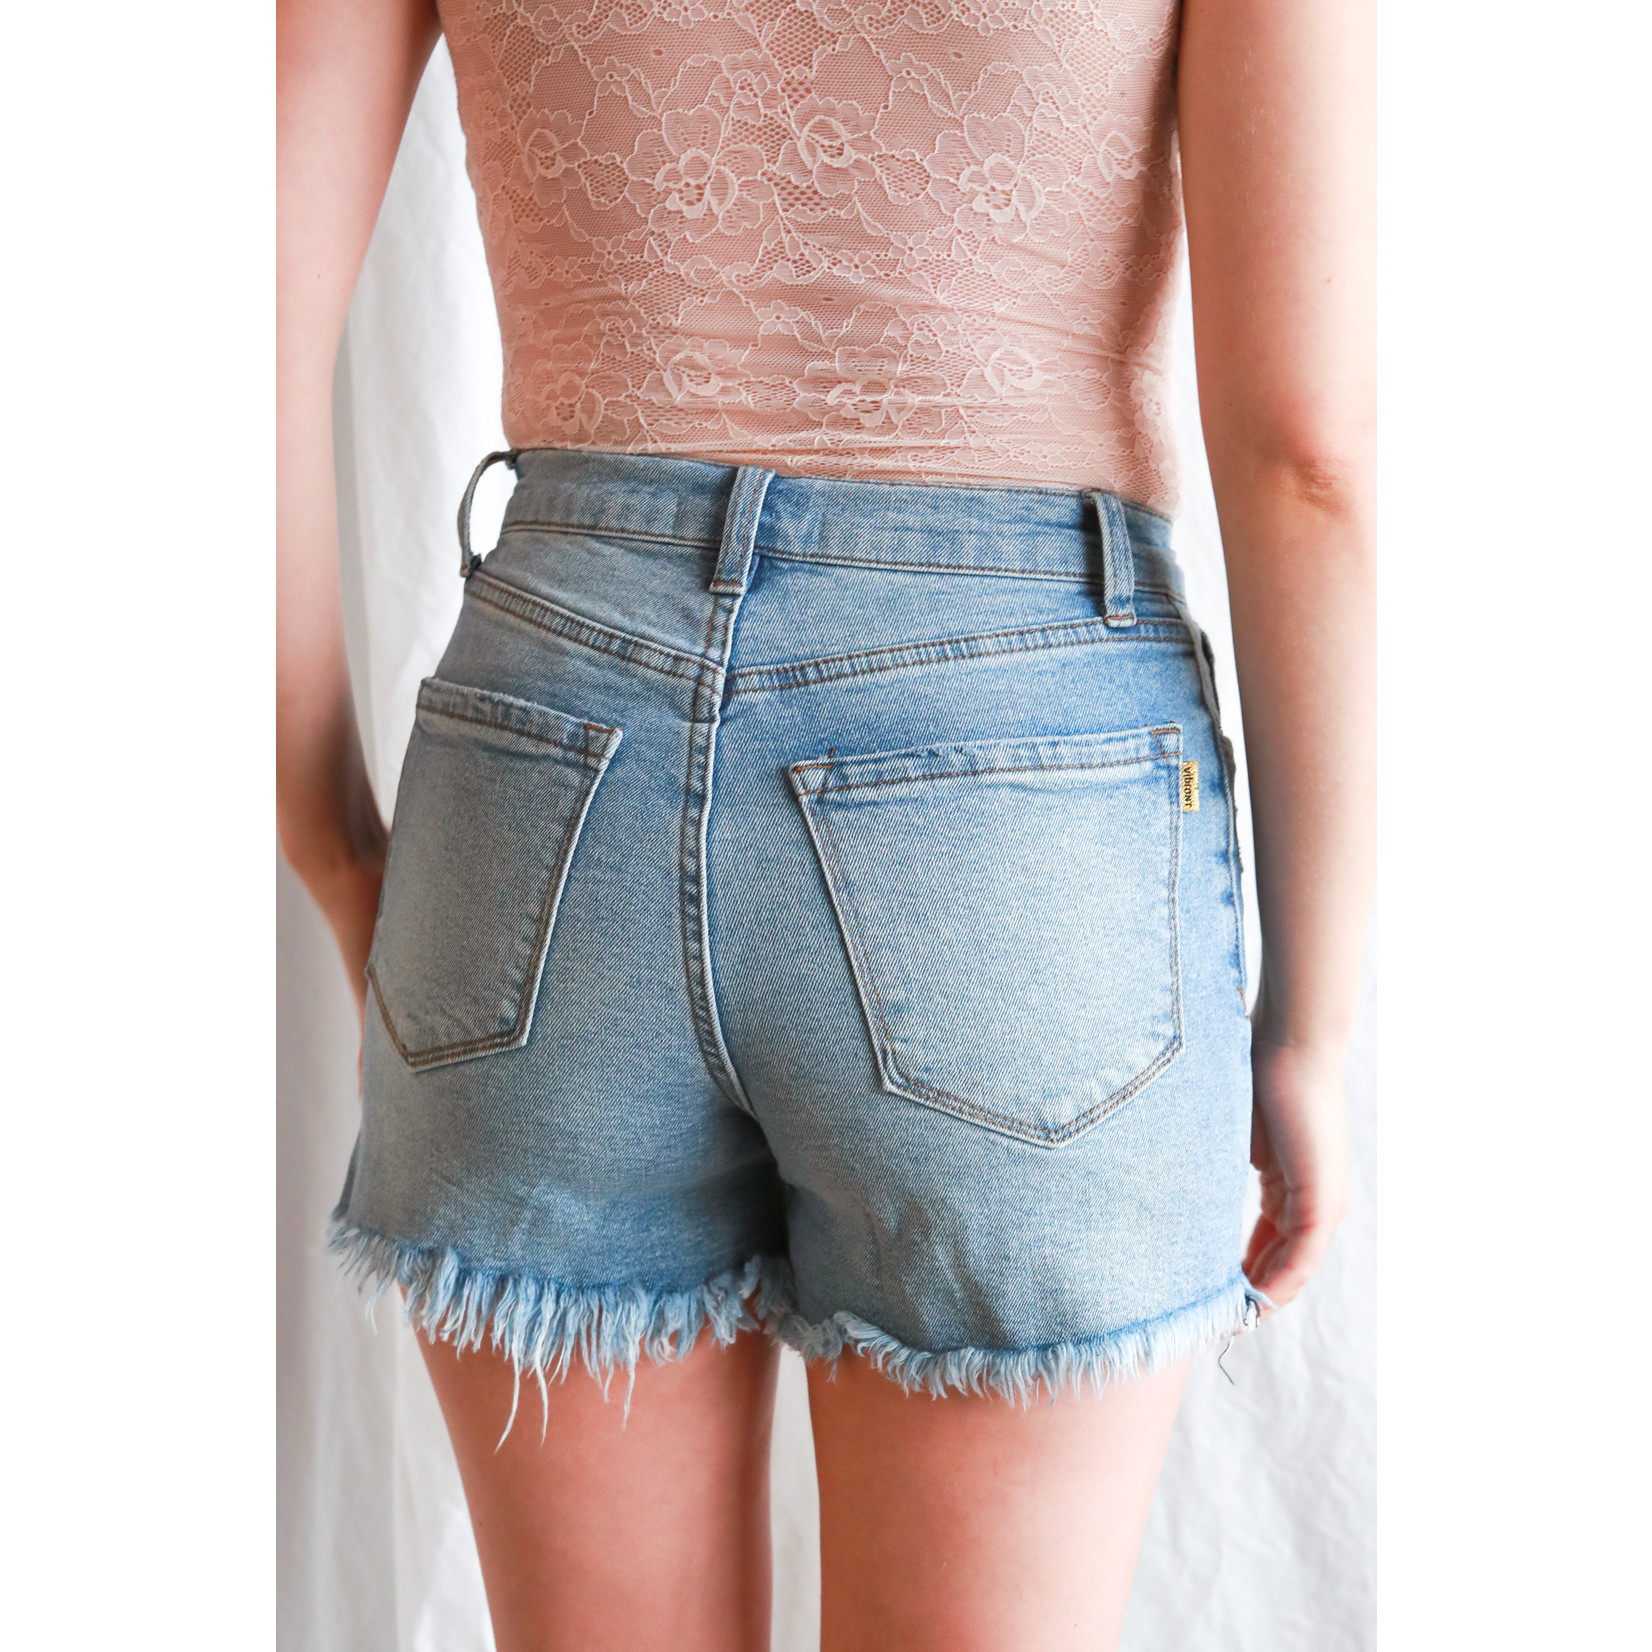 Vee distressed high rise short